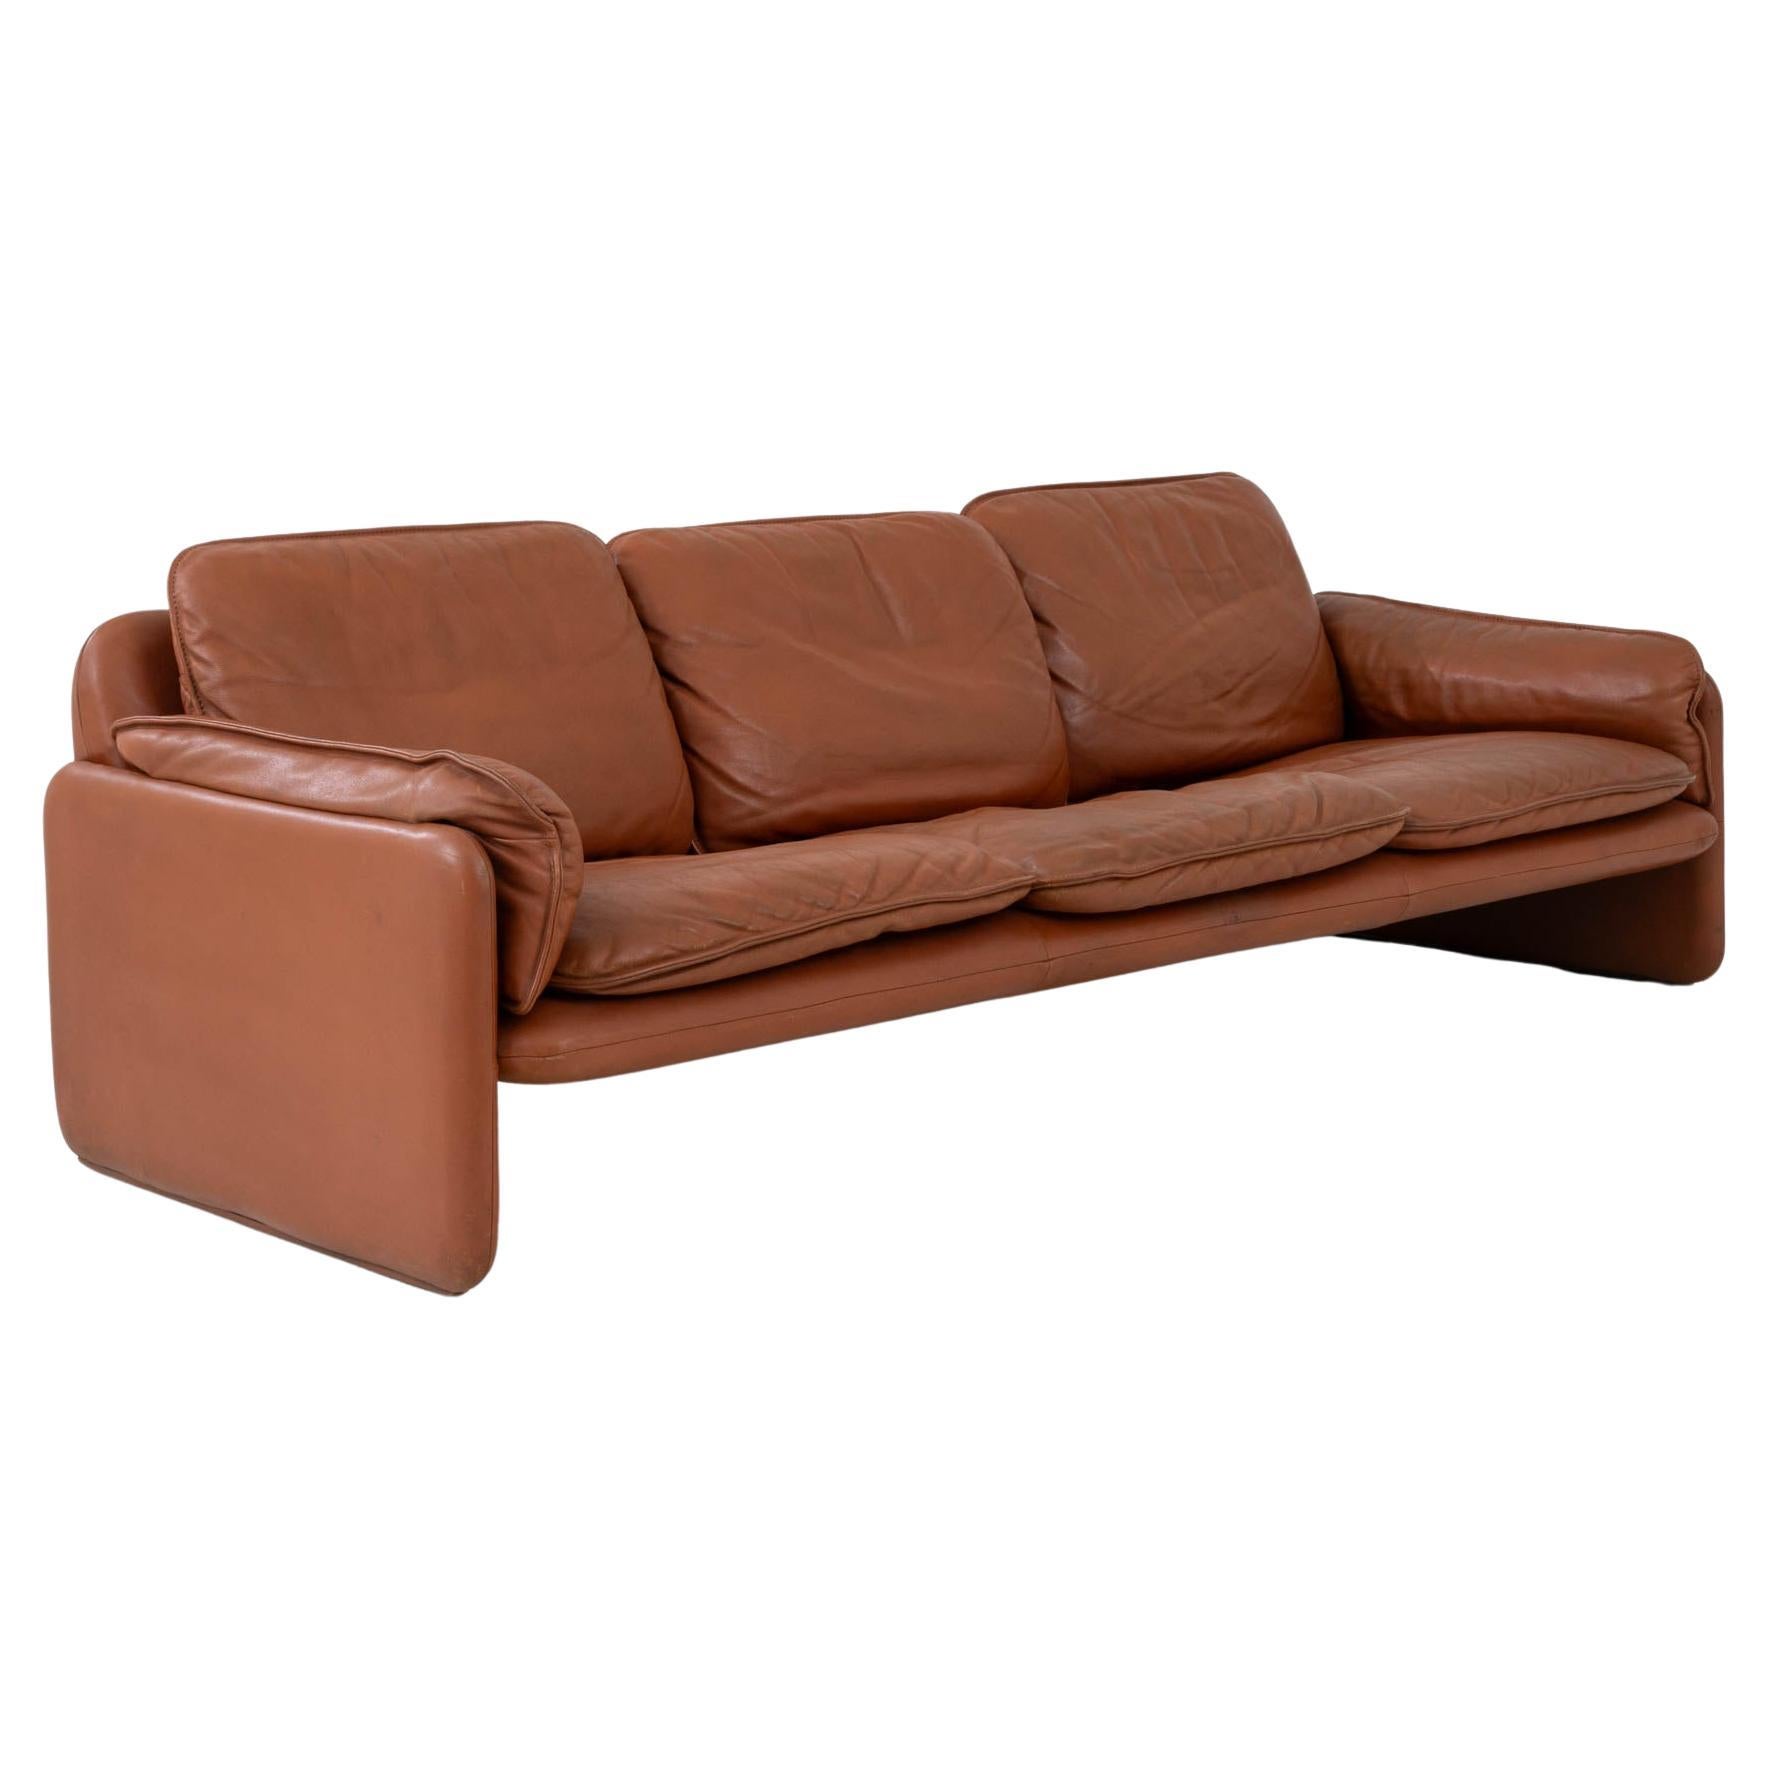 1970s Swiss Leather Sofa DS61 By De Sede For Sale